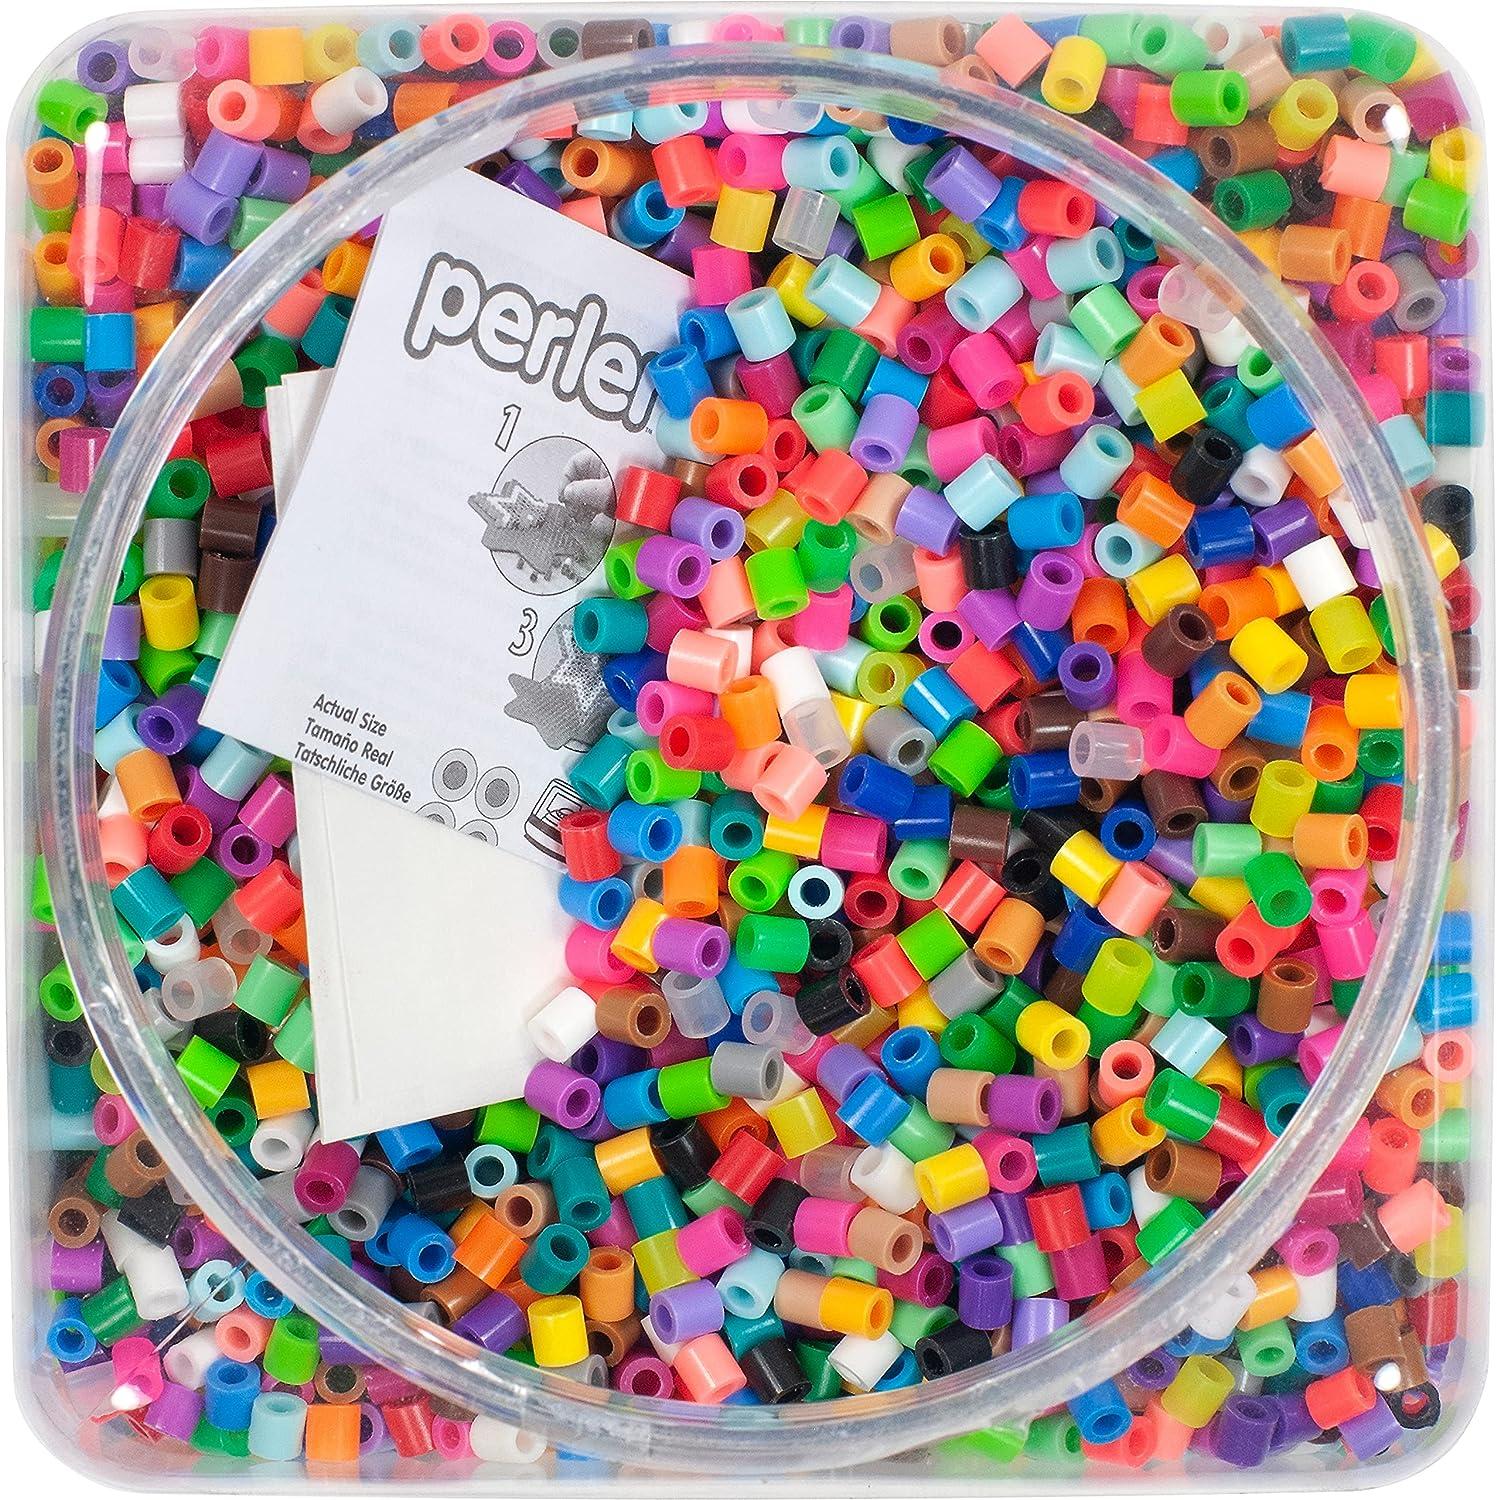  Perler Beads Glow in the Dark Beads for Kids Crafts, 11000 pcs  : Arts, Crafts & Sewing